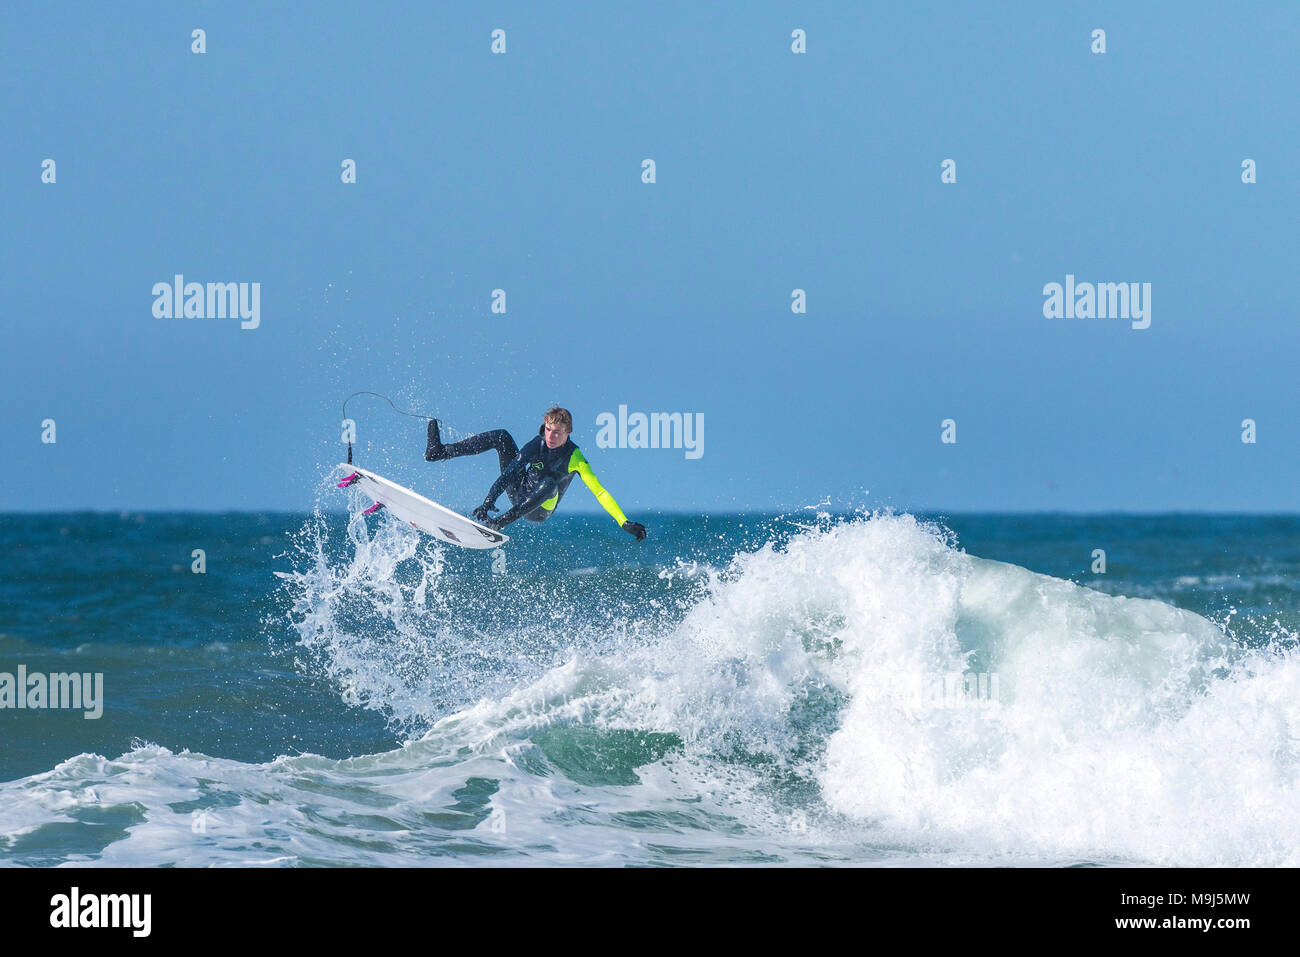 A surfer performing a spectacular jump from the top of a wave at Fistral in Newquay Cornwall. Stock Photo